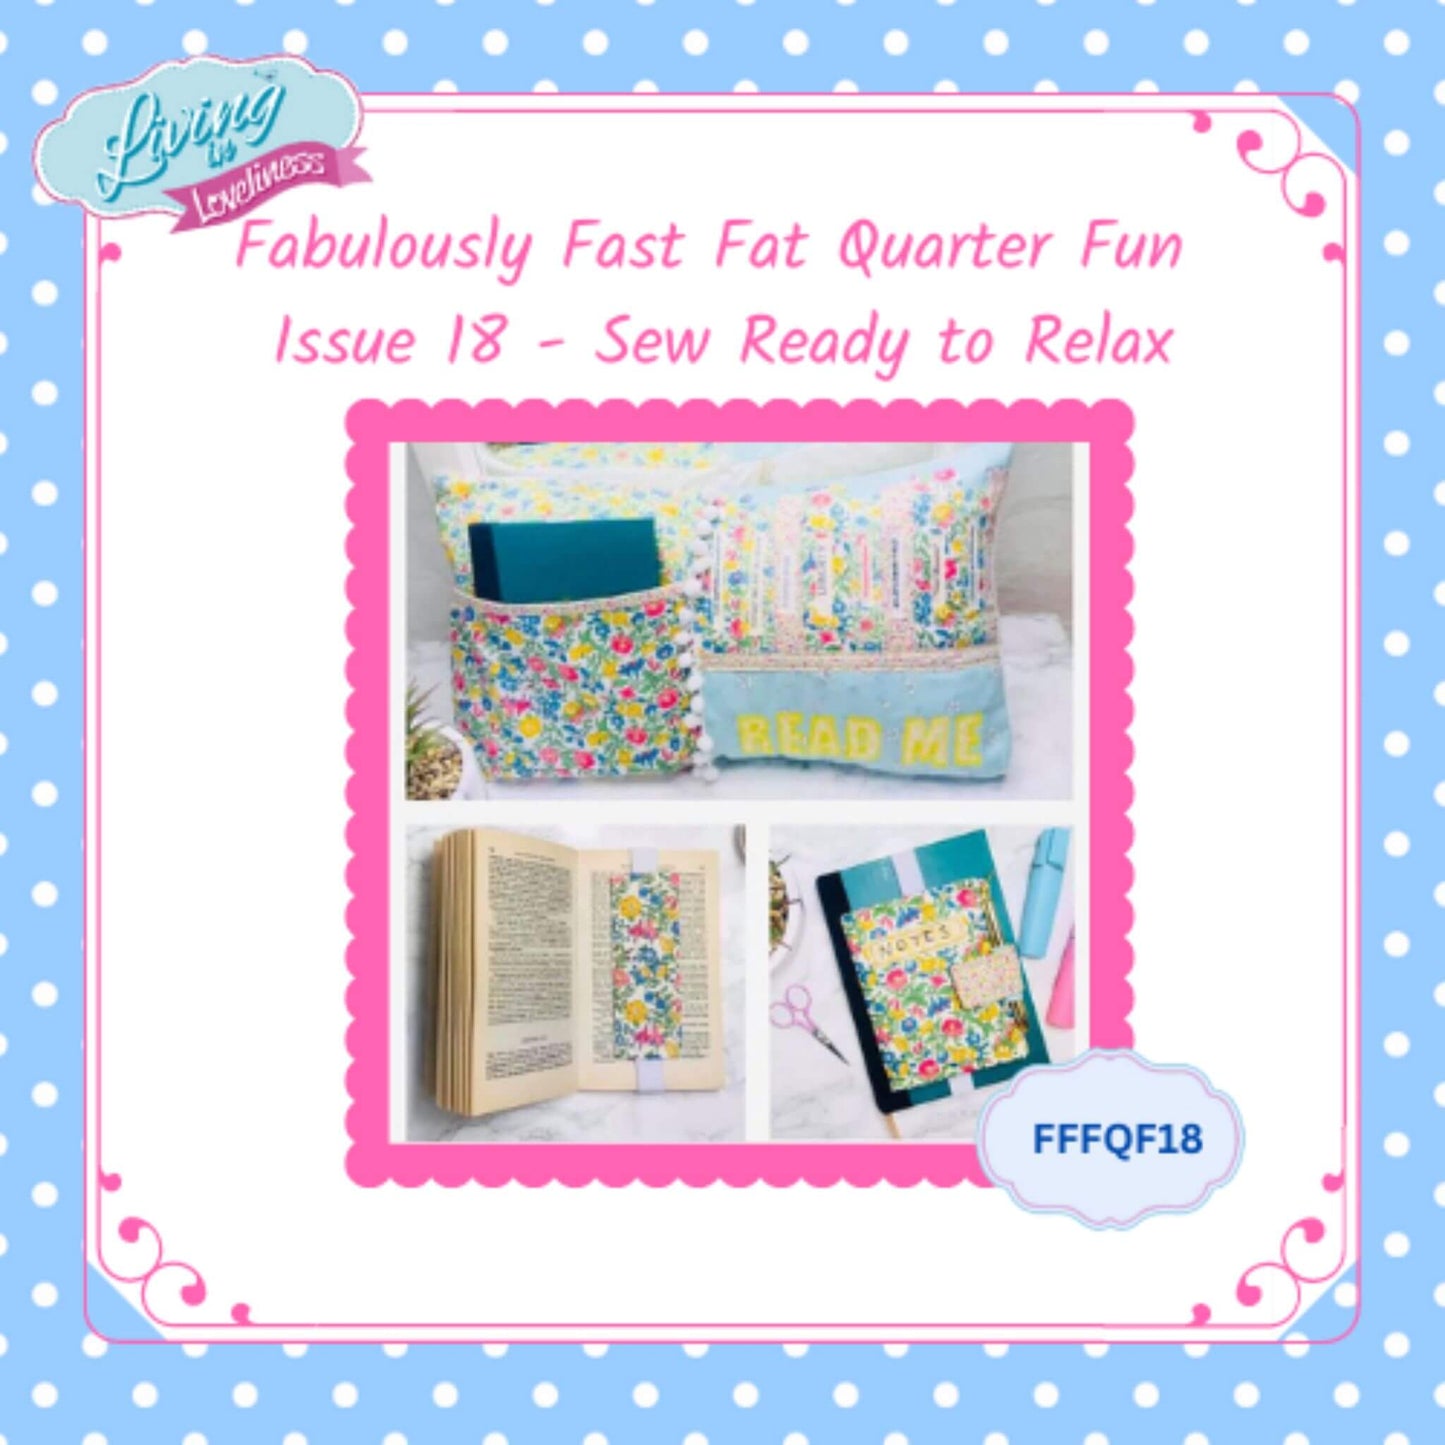 Issue 18 - Sew Ready to Relax - The Fabulously Fast Fat Quarter Fun Series by Living in Loveliness